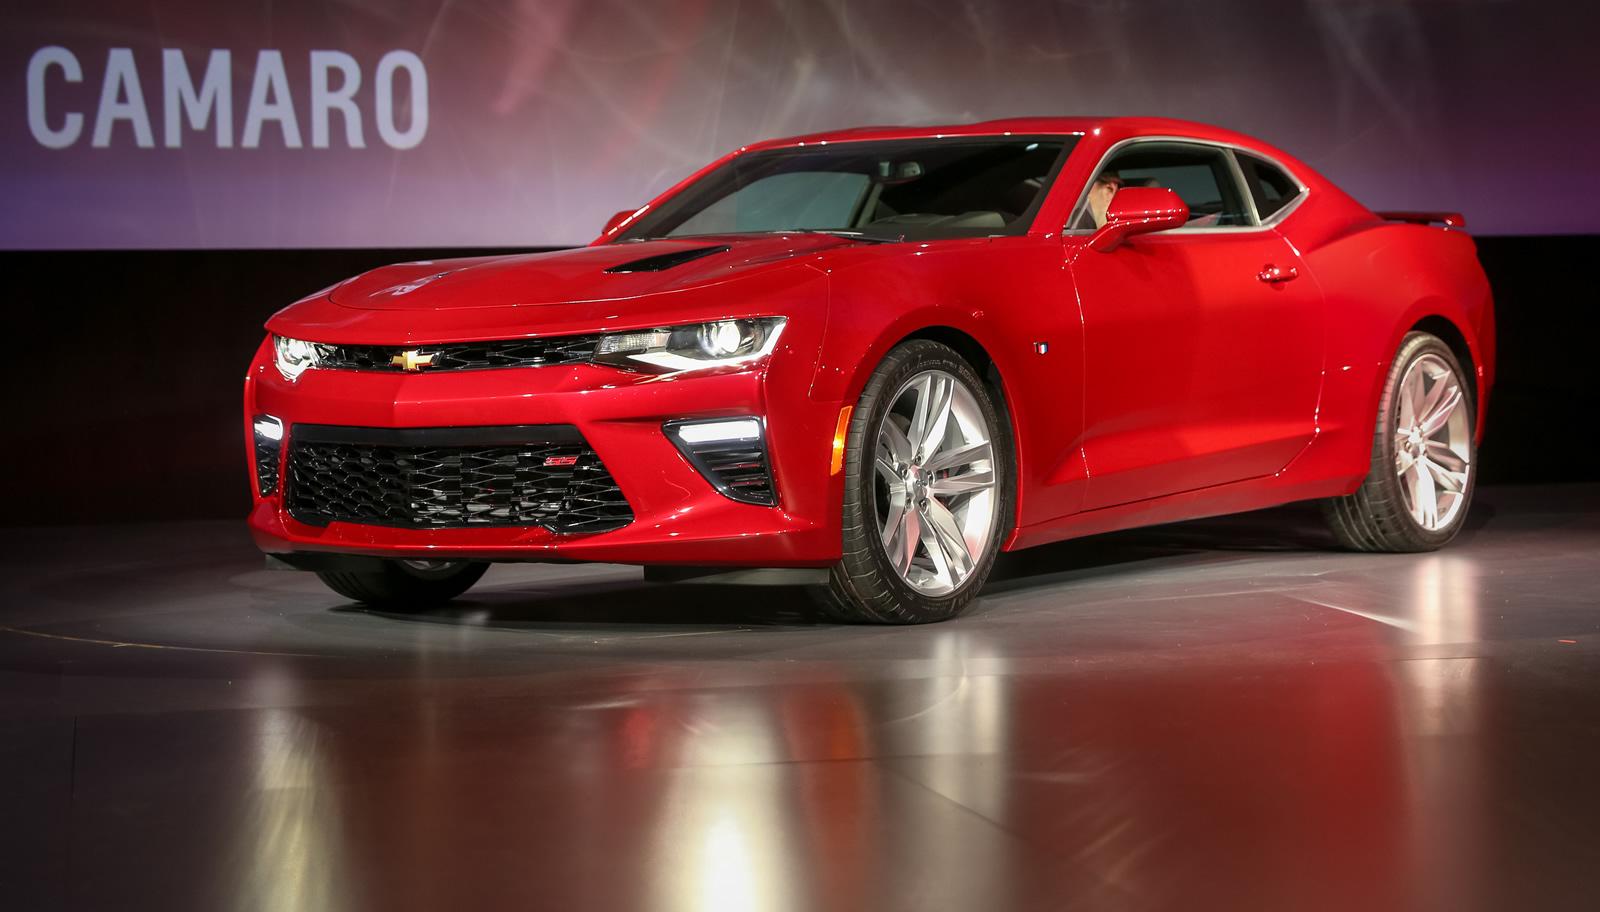 27+ Is camaro available in india ideas